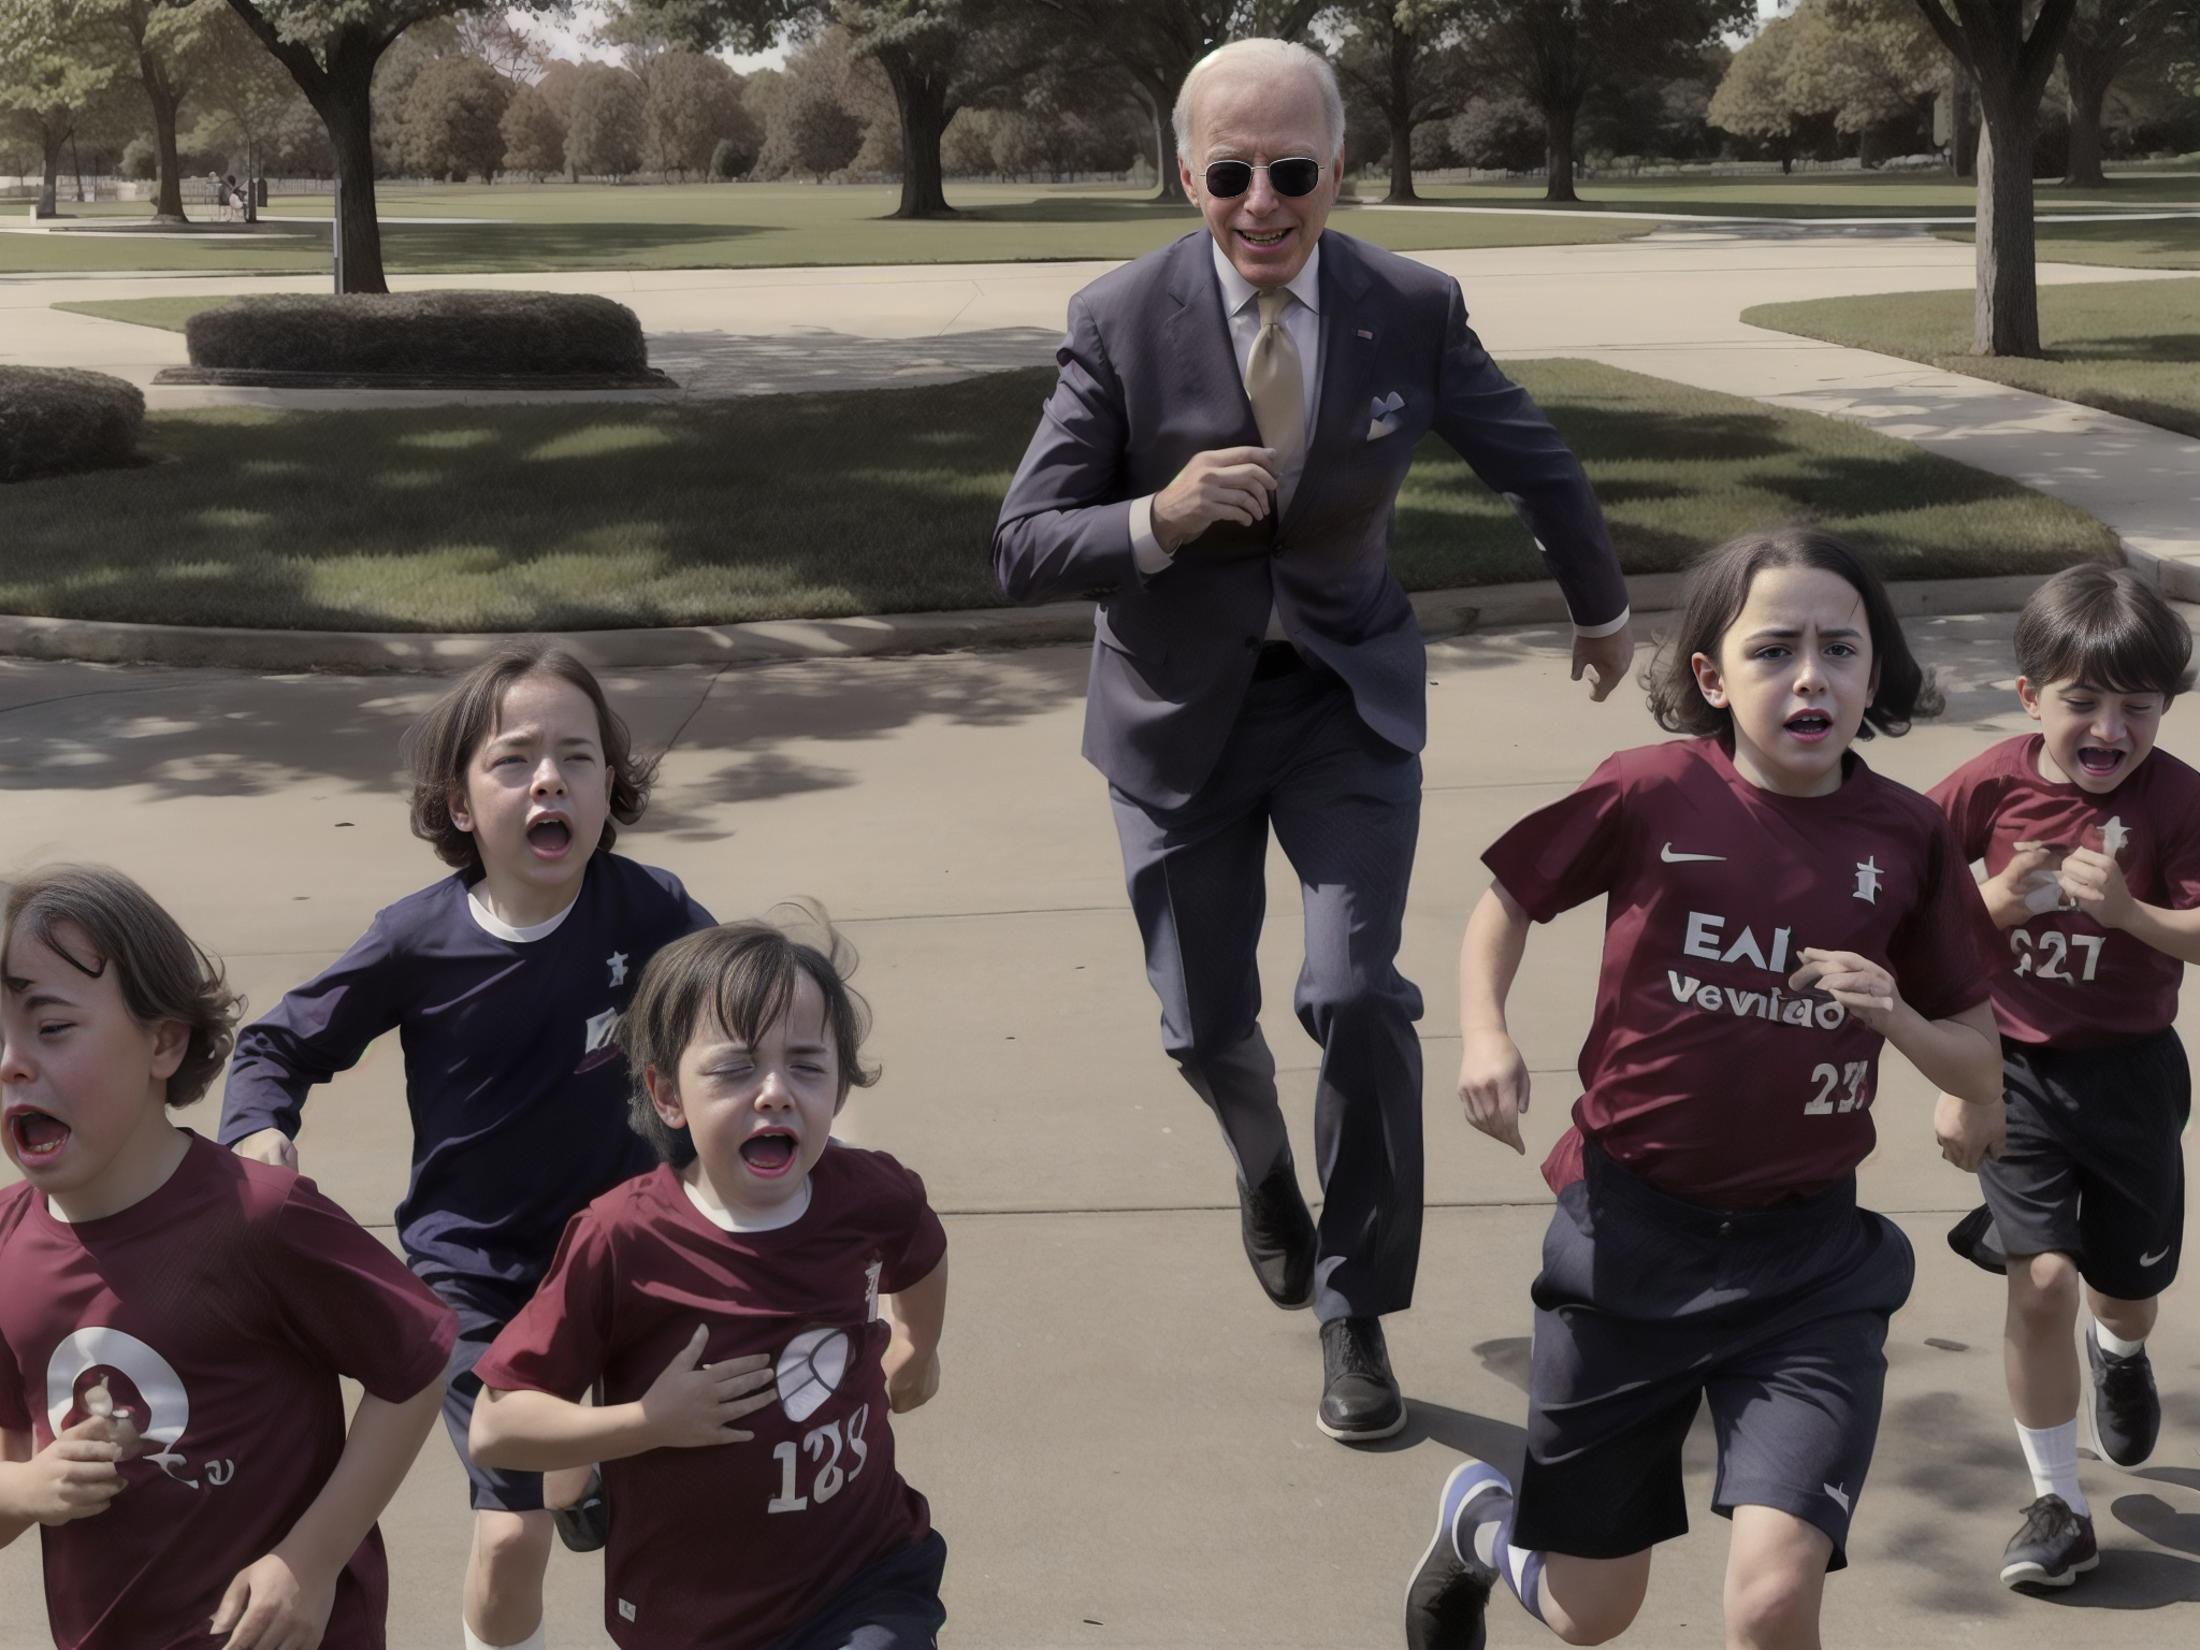 Joe Biden chasing kids in a park, wearing a suit and tie and sunglasses.